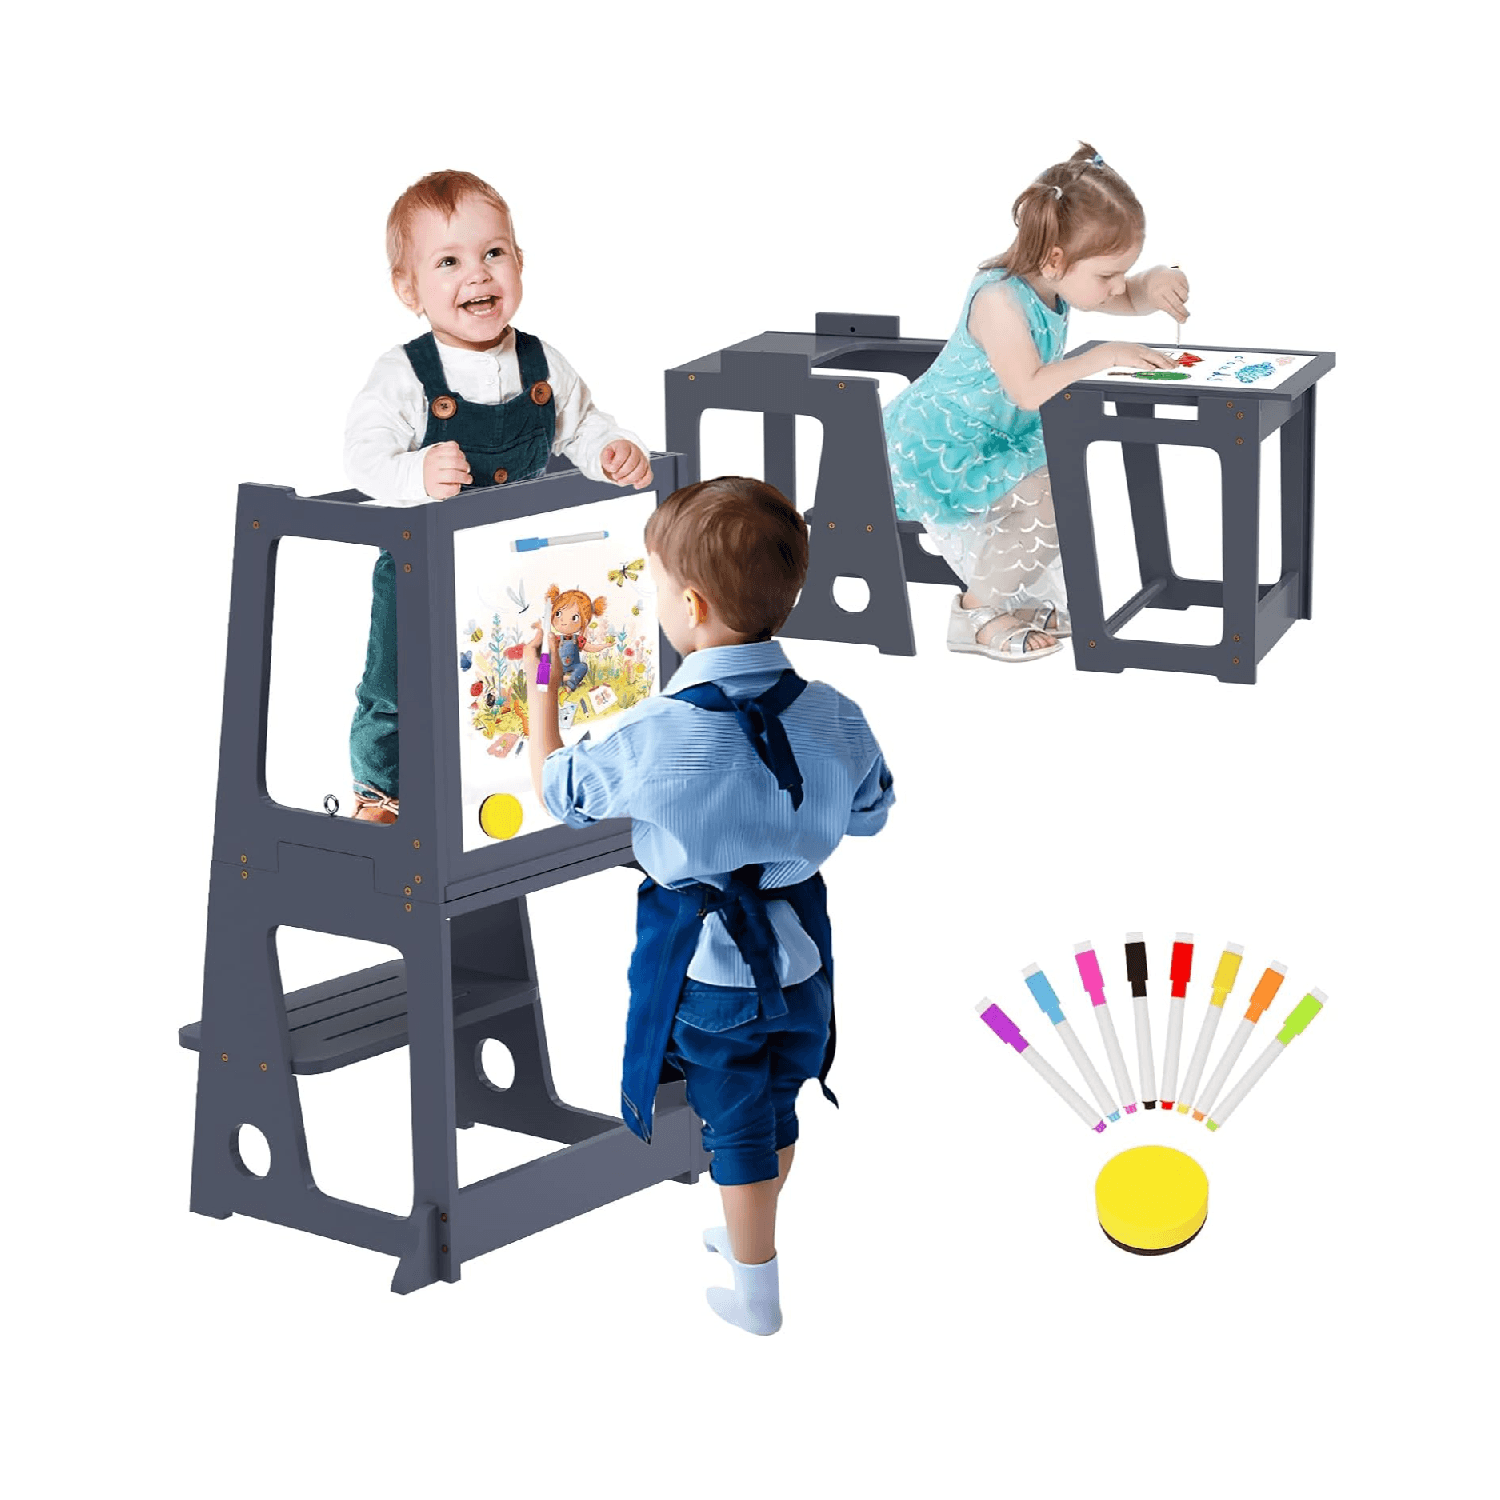 Montessori BueDeHai 4-in-1 Learning Tower With Whiteboard and Safety Rail Gray